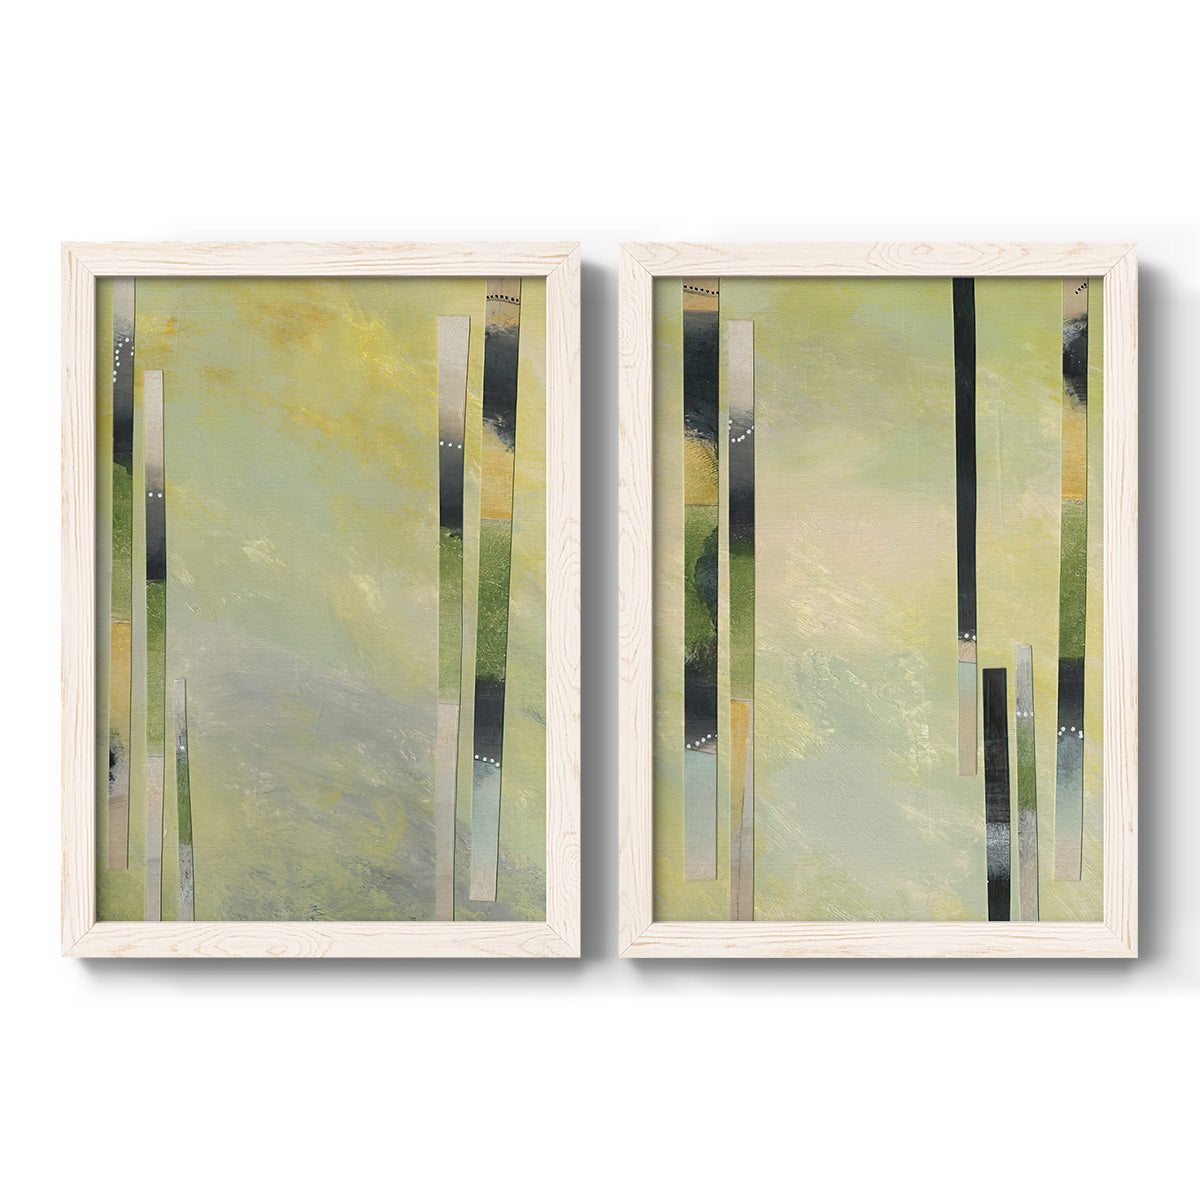 Neutral Assemblage III - Premium Framed Canvas 2 Piece Set - Ready to Hang